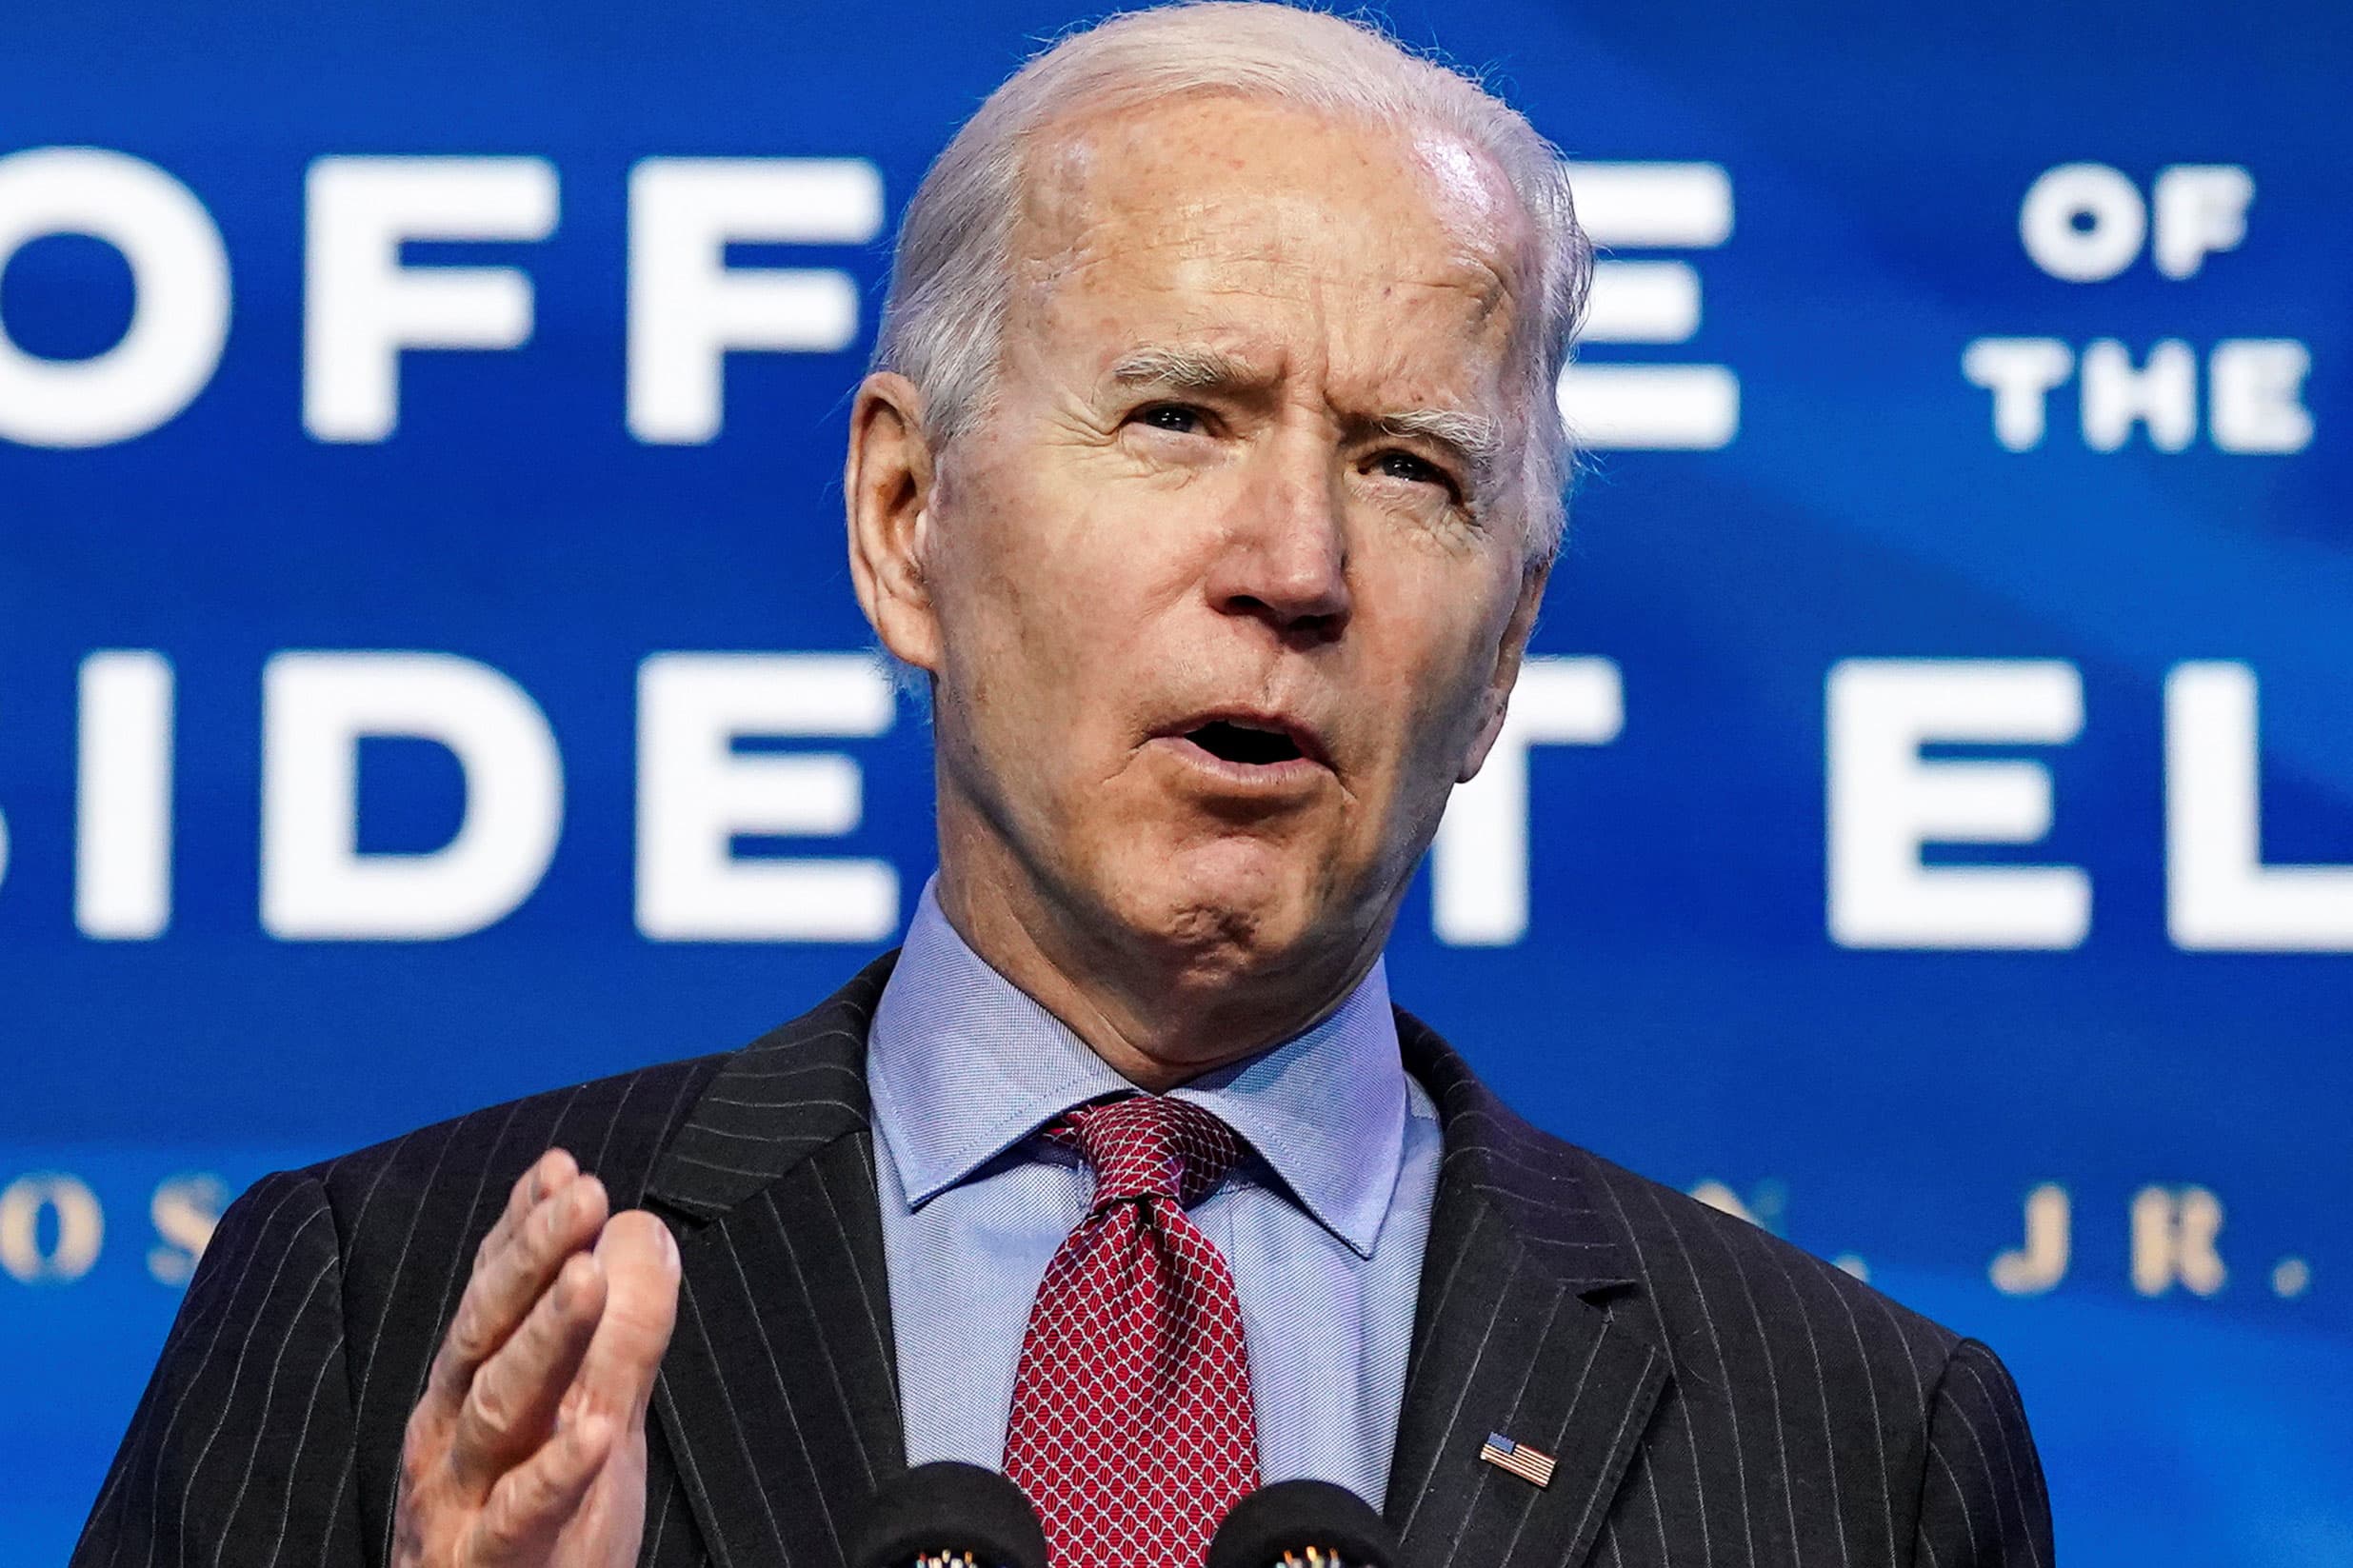 Biden to unveil new Covid stimulus plan, hopes for bipartisan support - CNBC